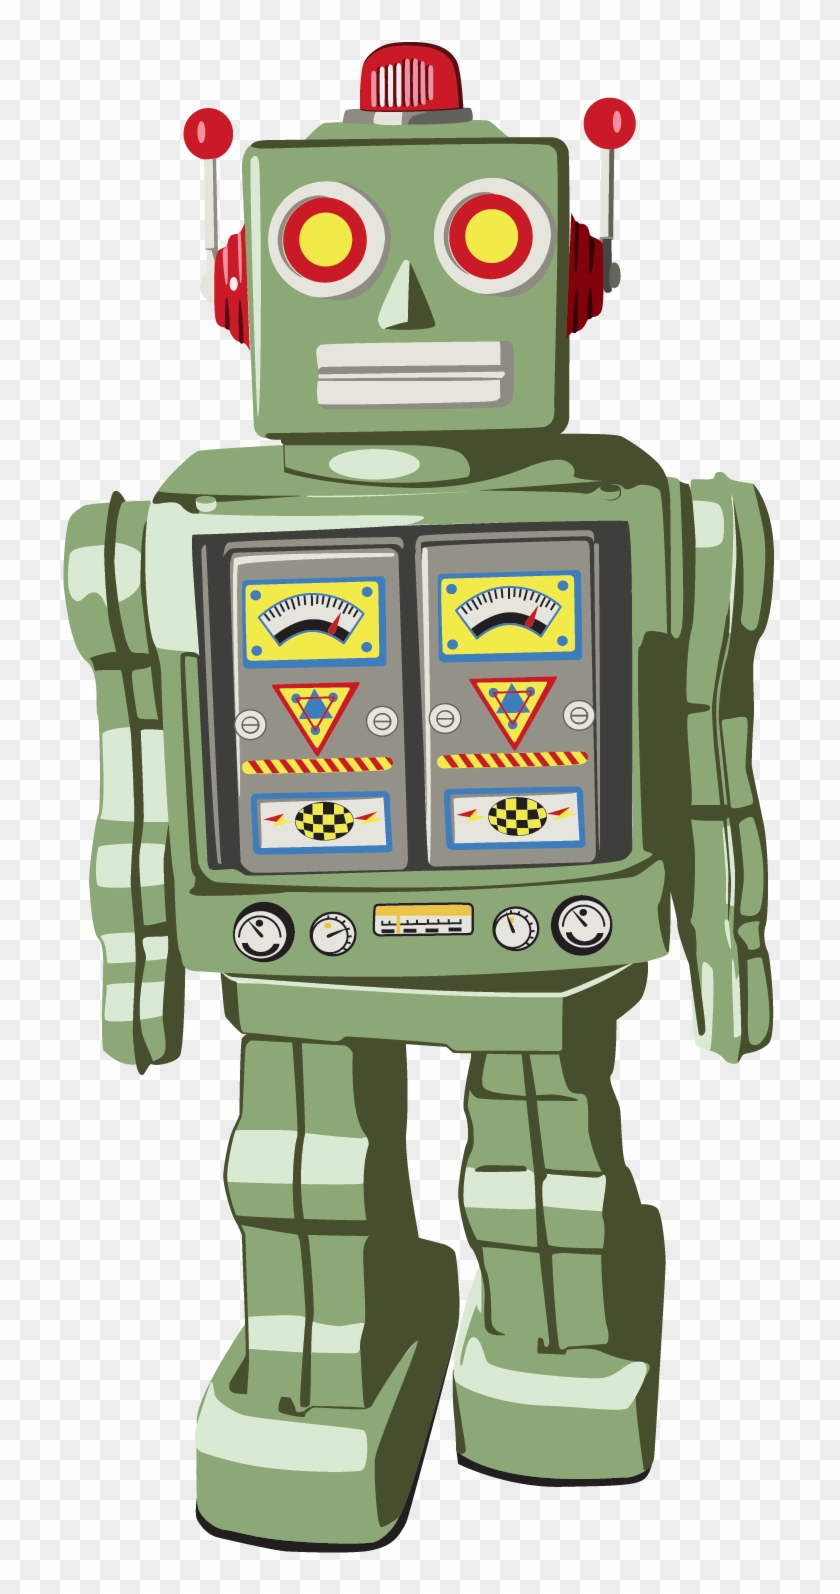 Worried About Zombie Apocalypses And Imminent Civil - Retro Robot Png Clipart #552272